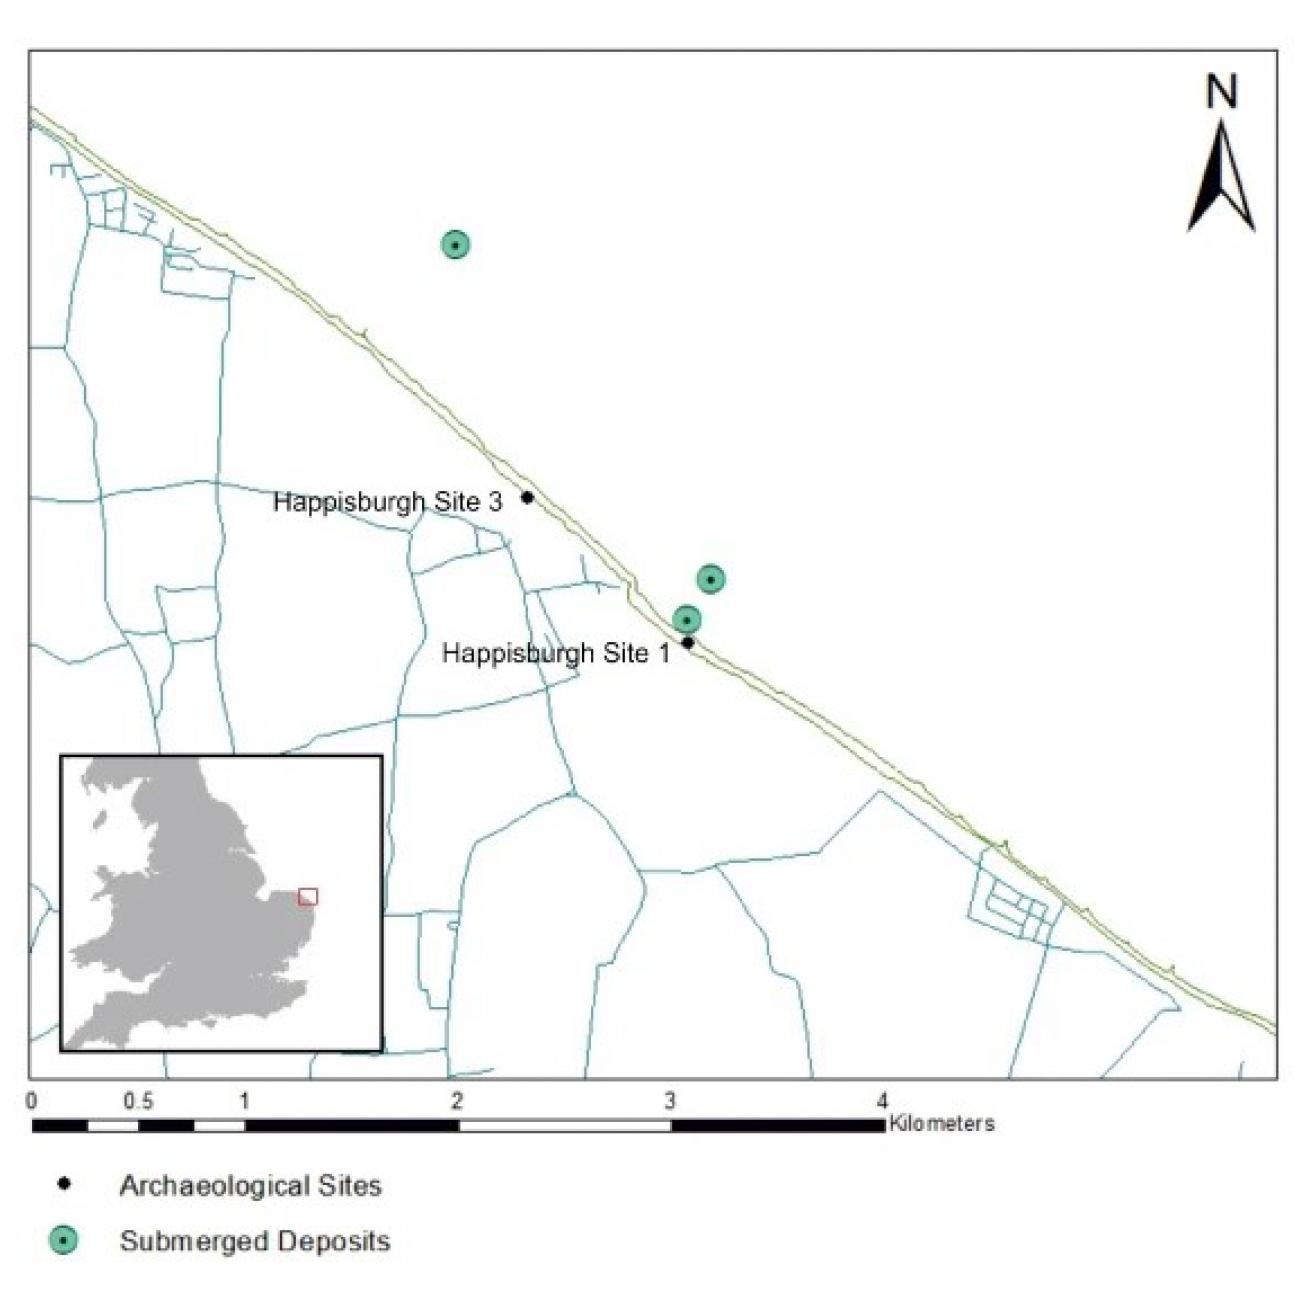 Location map for the archaeological work at Happisburgh